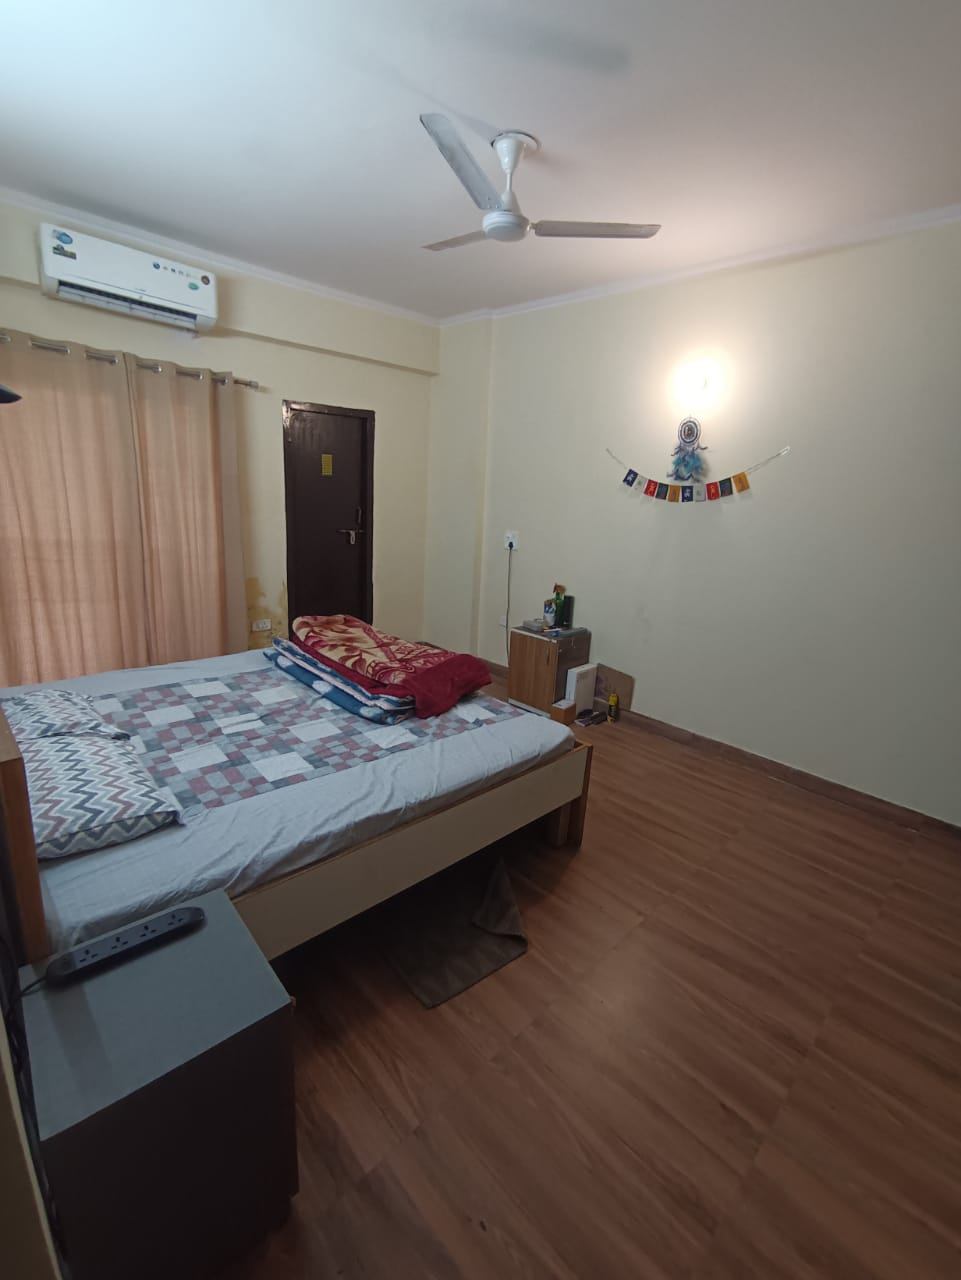 3 Bed/ 3 Bath Rent Apartment/ Flat; 1,750 sq. ft. carpet area, Furnished for rent @Sector 75 noida 